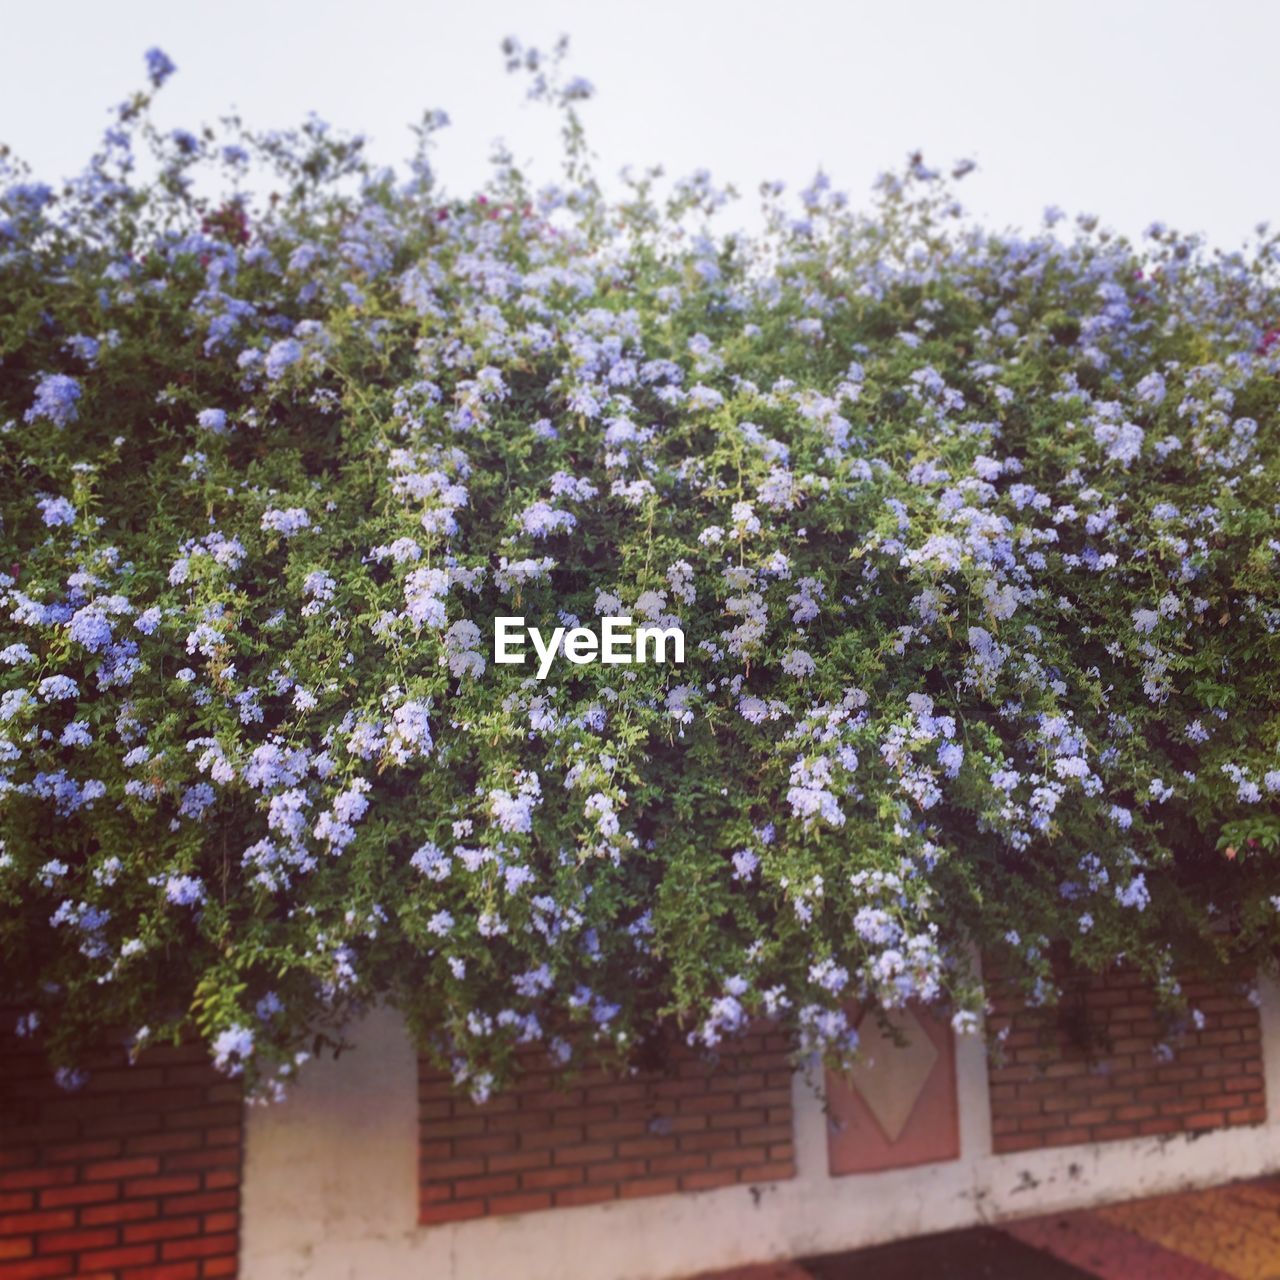 LOW ANGLE VIEW OF FLOWERS ON TREE